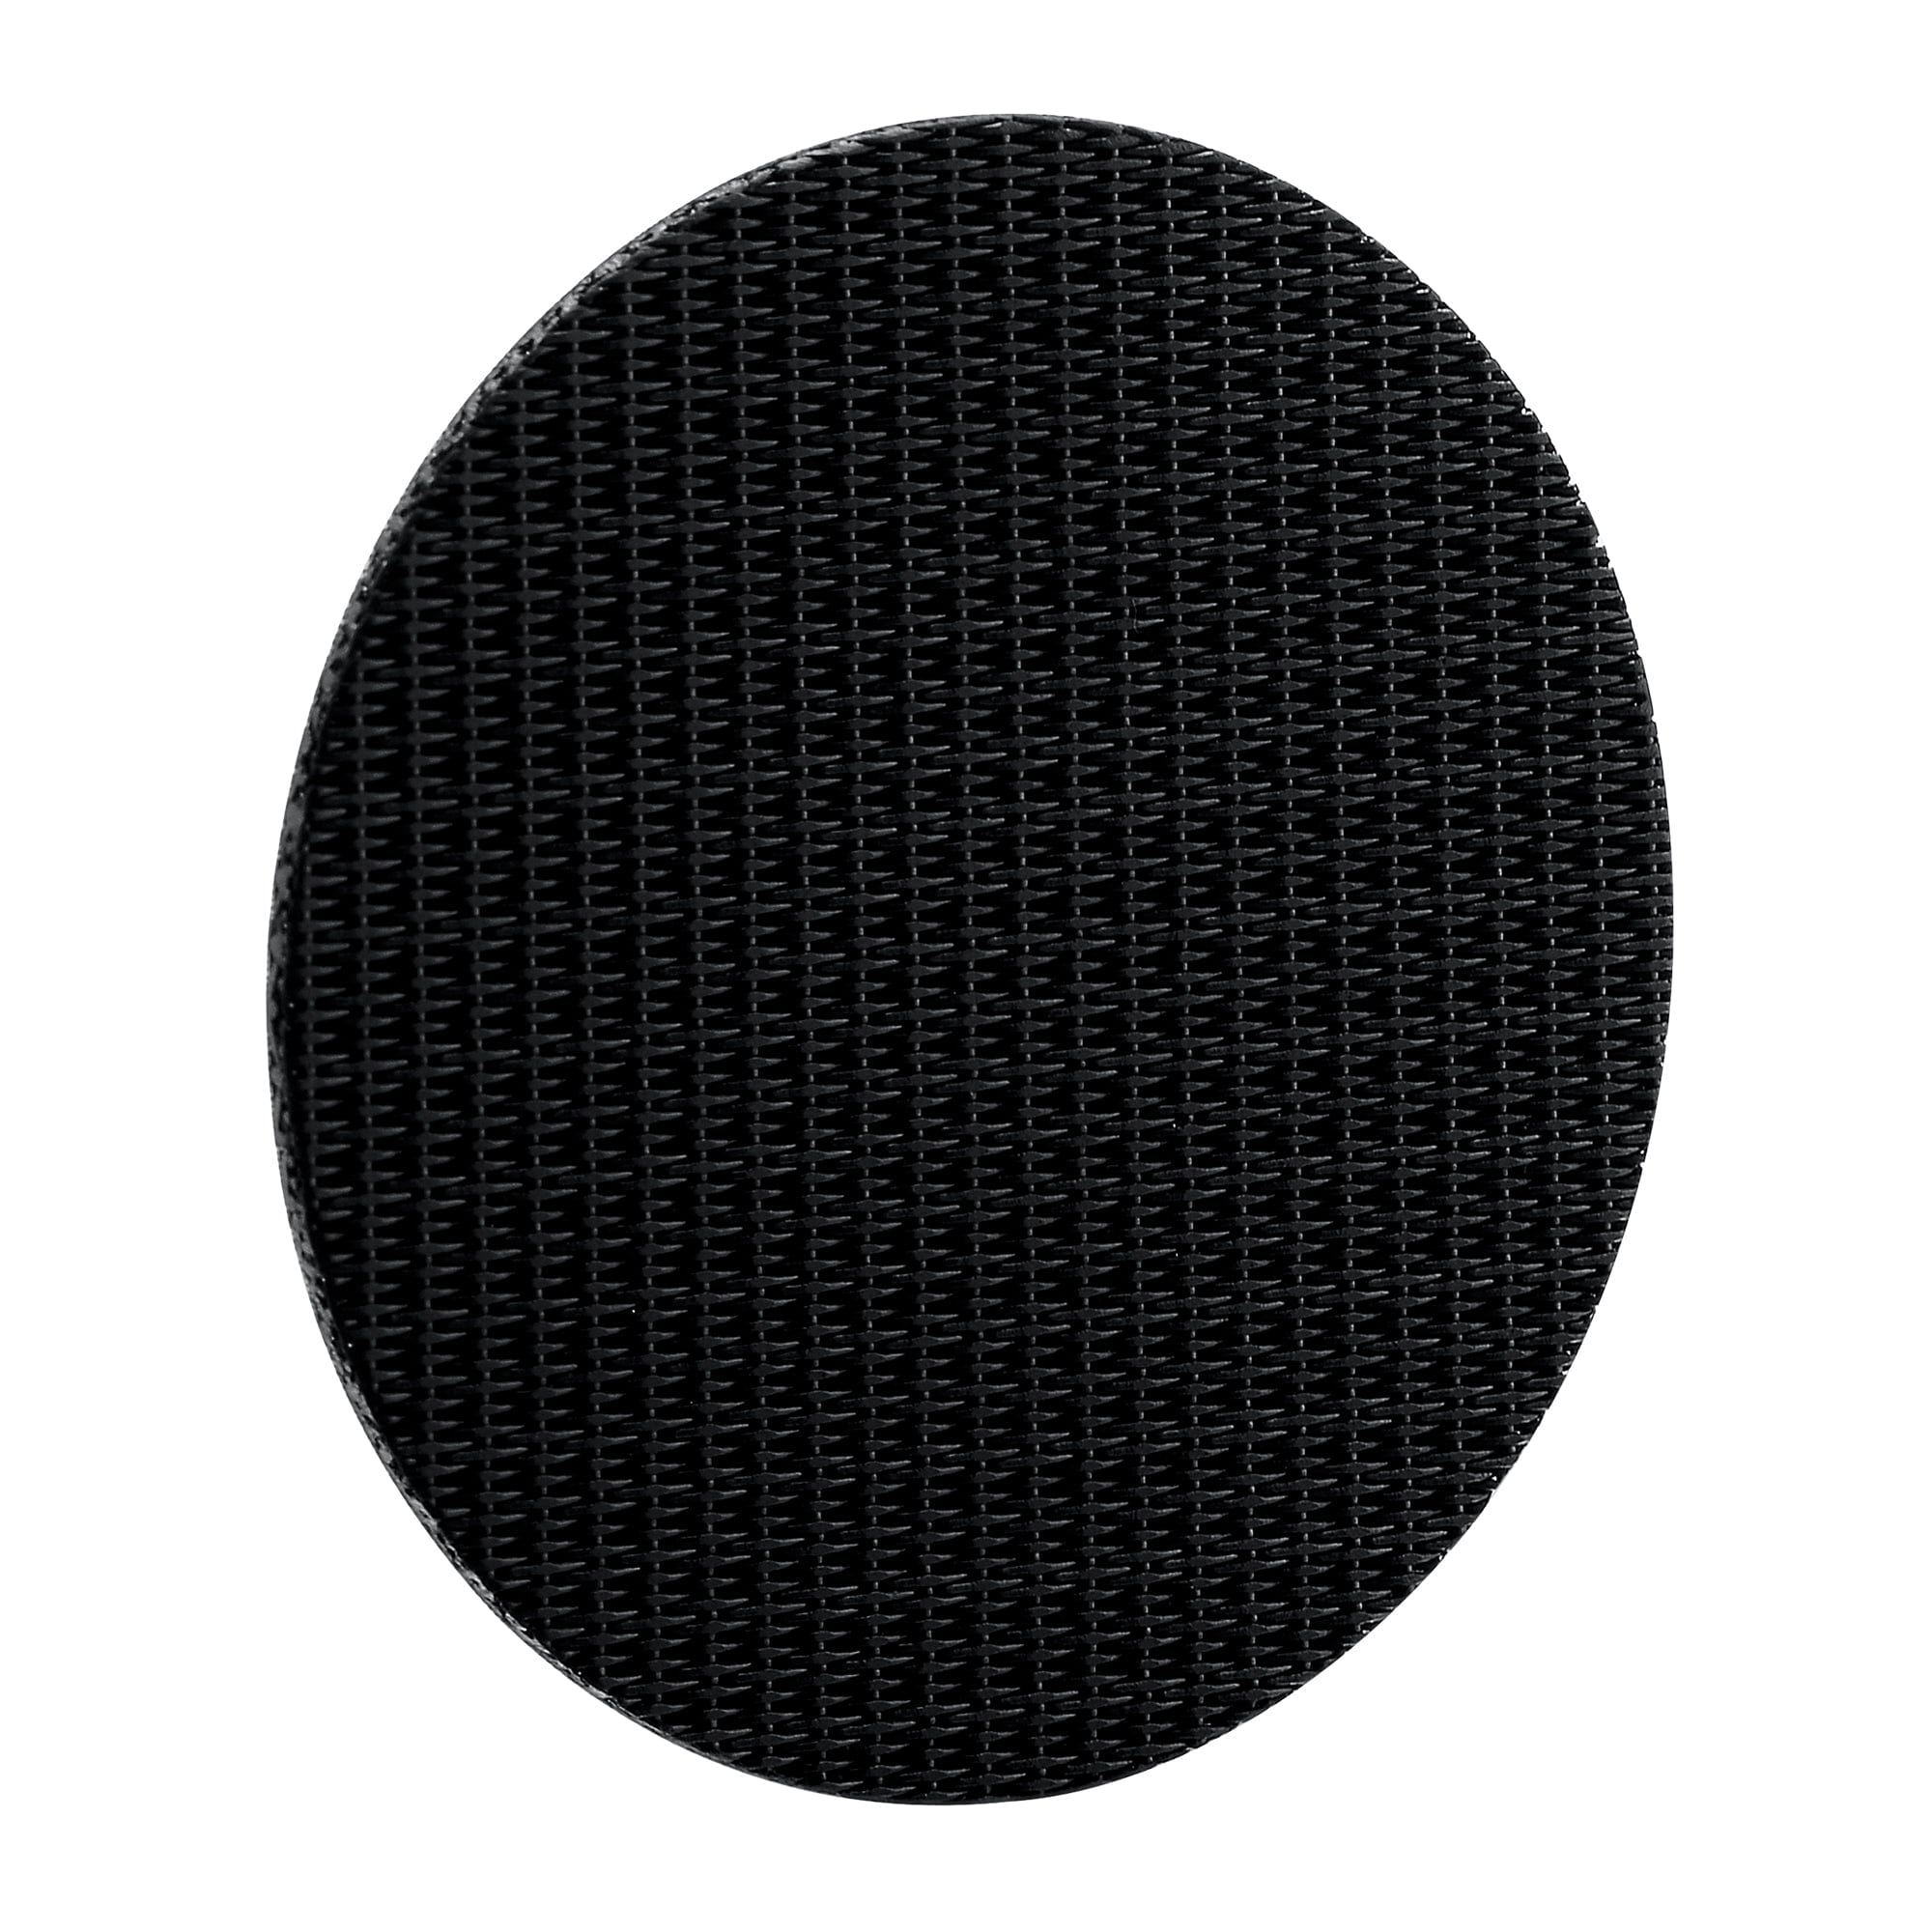 Normcore Puck Screen with Titanium PVD Coating - 1.7mm Thickness